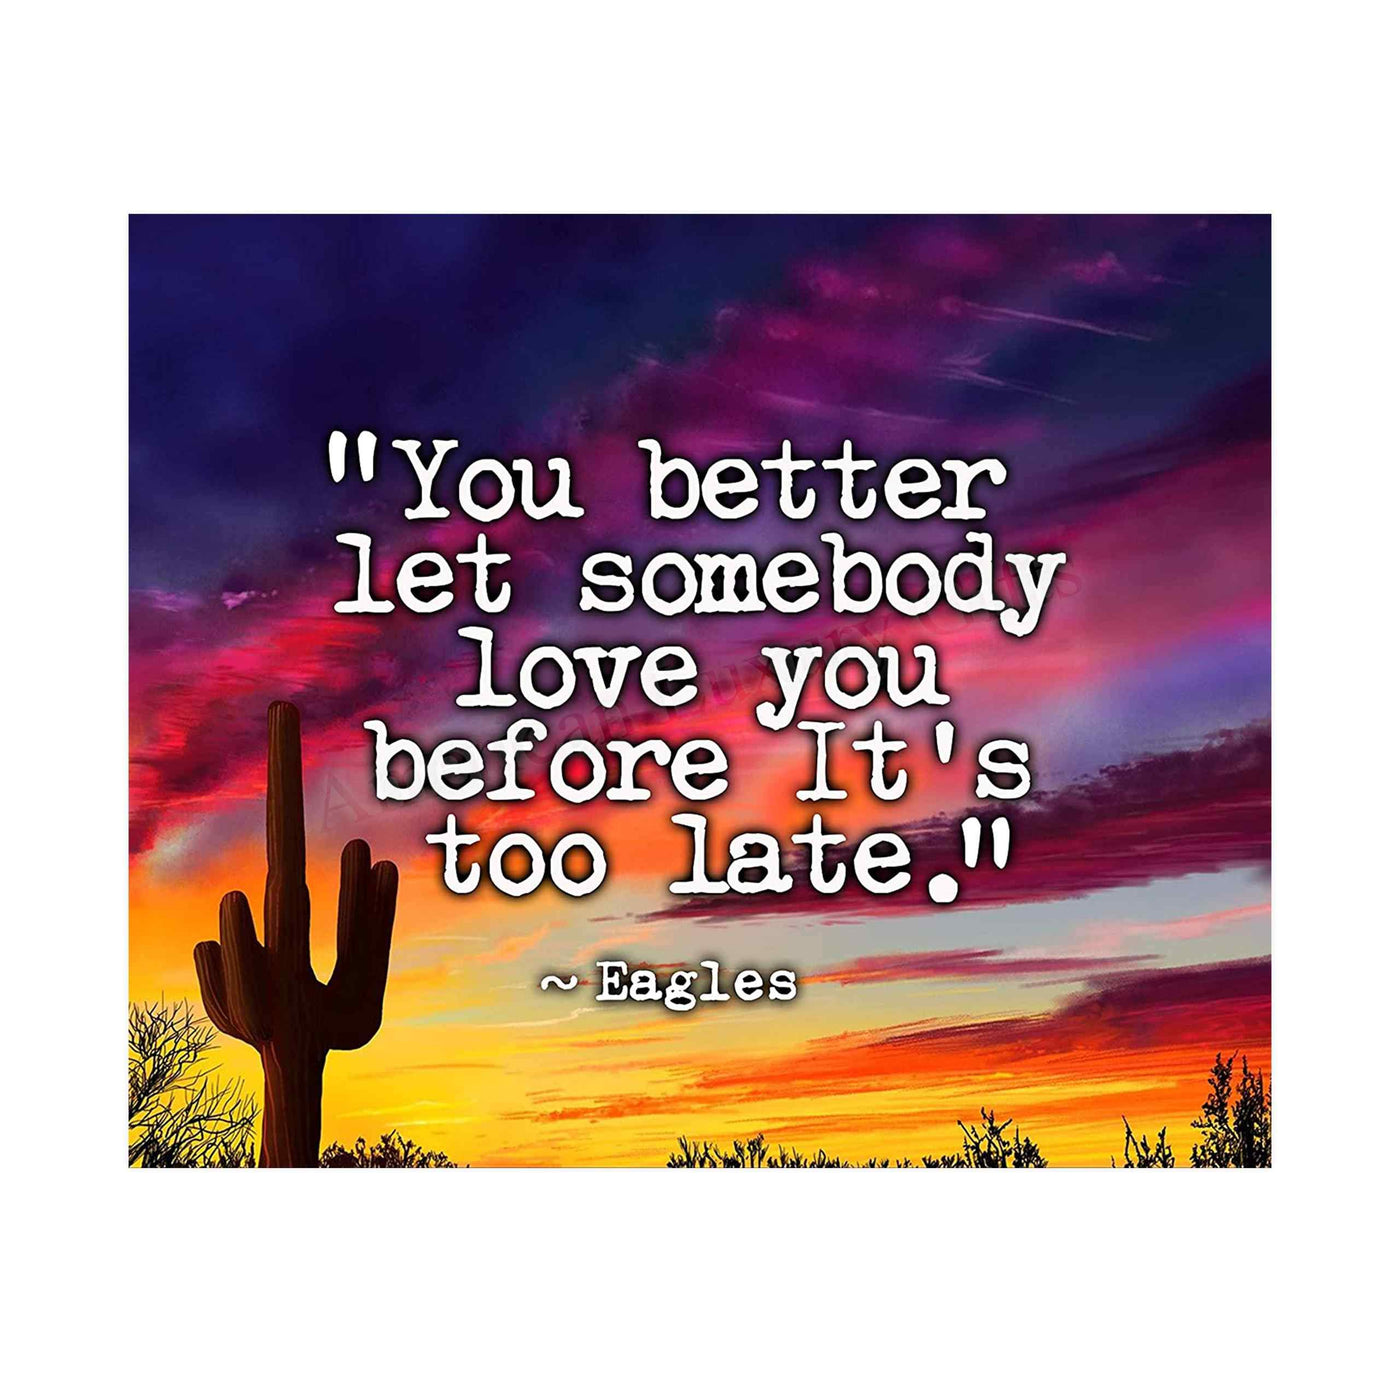 The Eagles-"You Better Let Somebody Love You"-Song Lyrics Art Print -10 x 8" Rock Music Wall Print-Ready to Frame. Typographic Sunset Print For Home-Studio-Bar-Cave Decor. Perfect Gift for Fans!